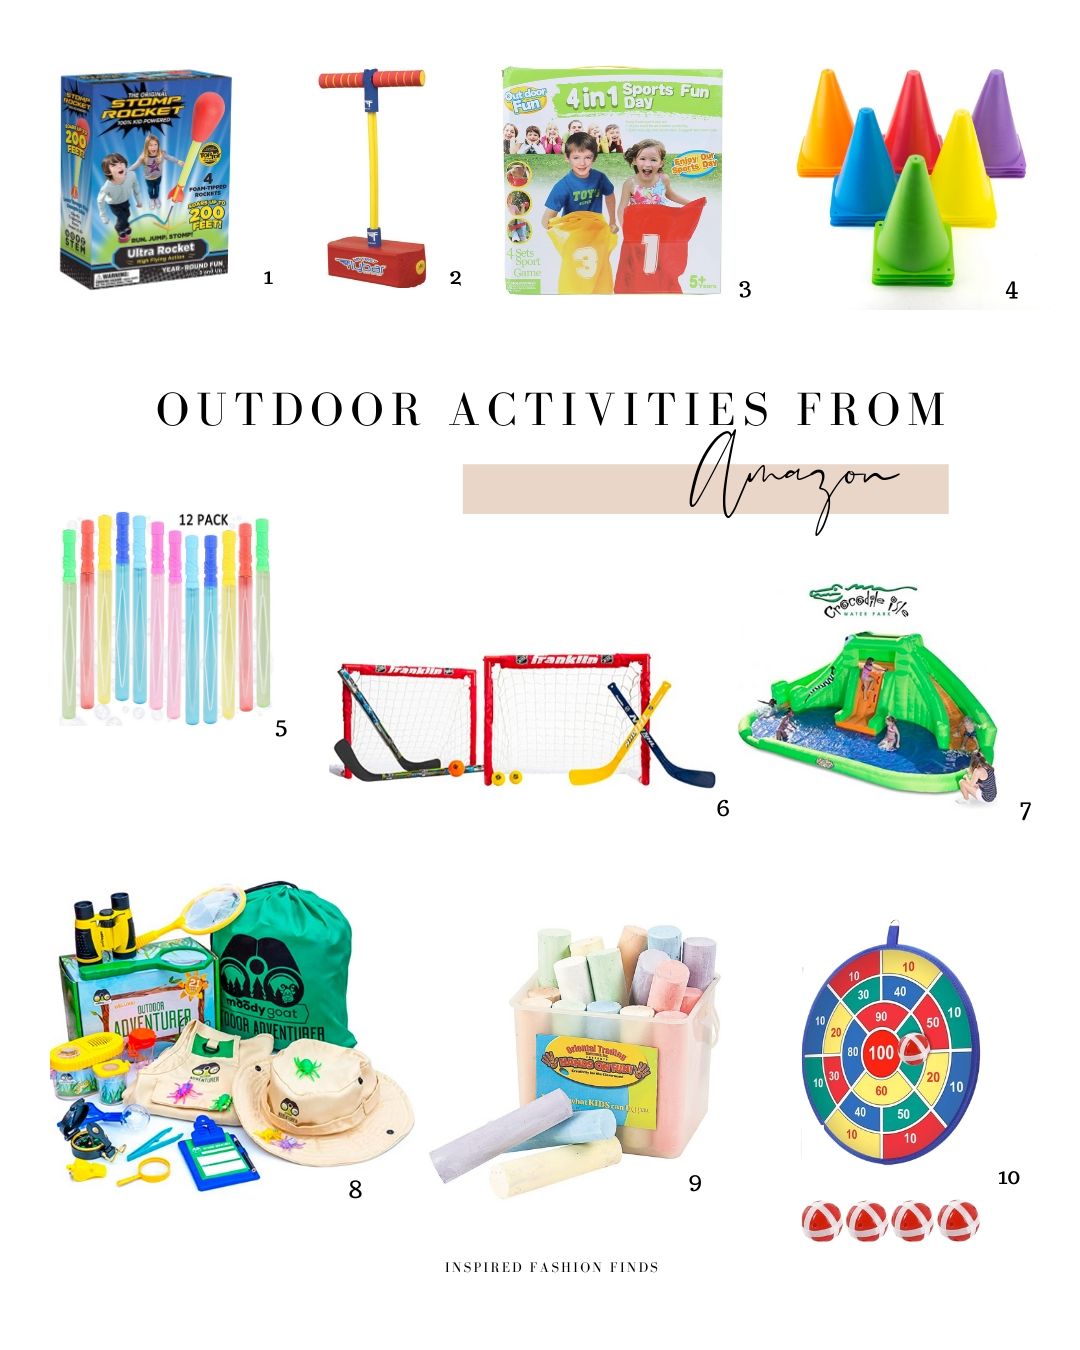 AC-Outdoor Activites From Amazon